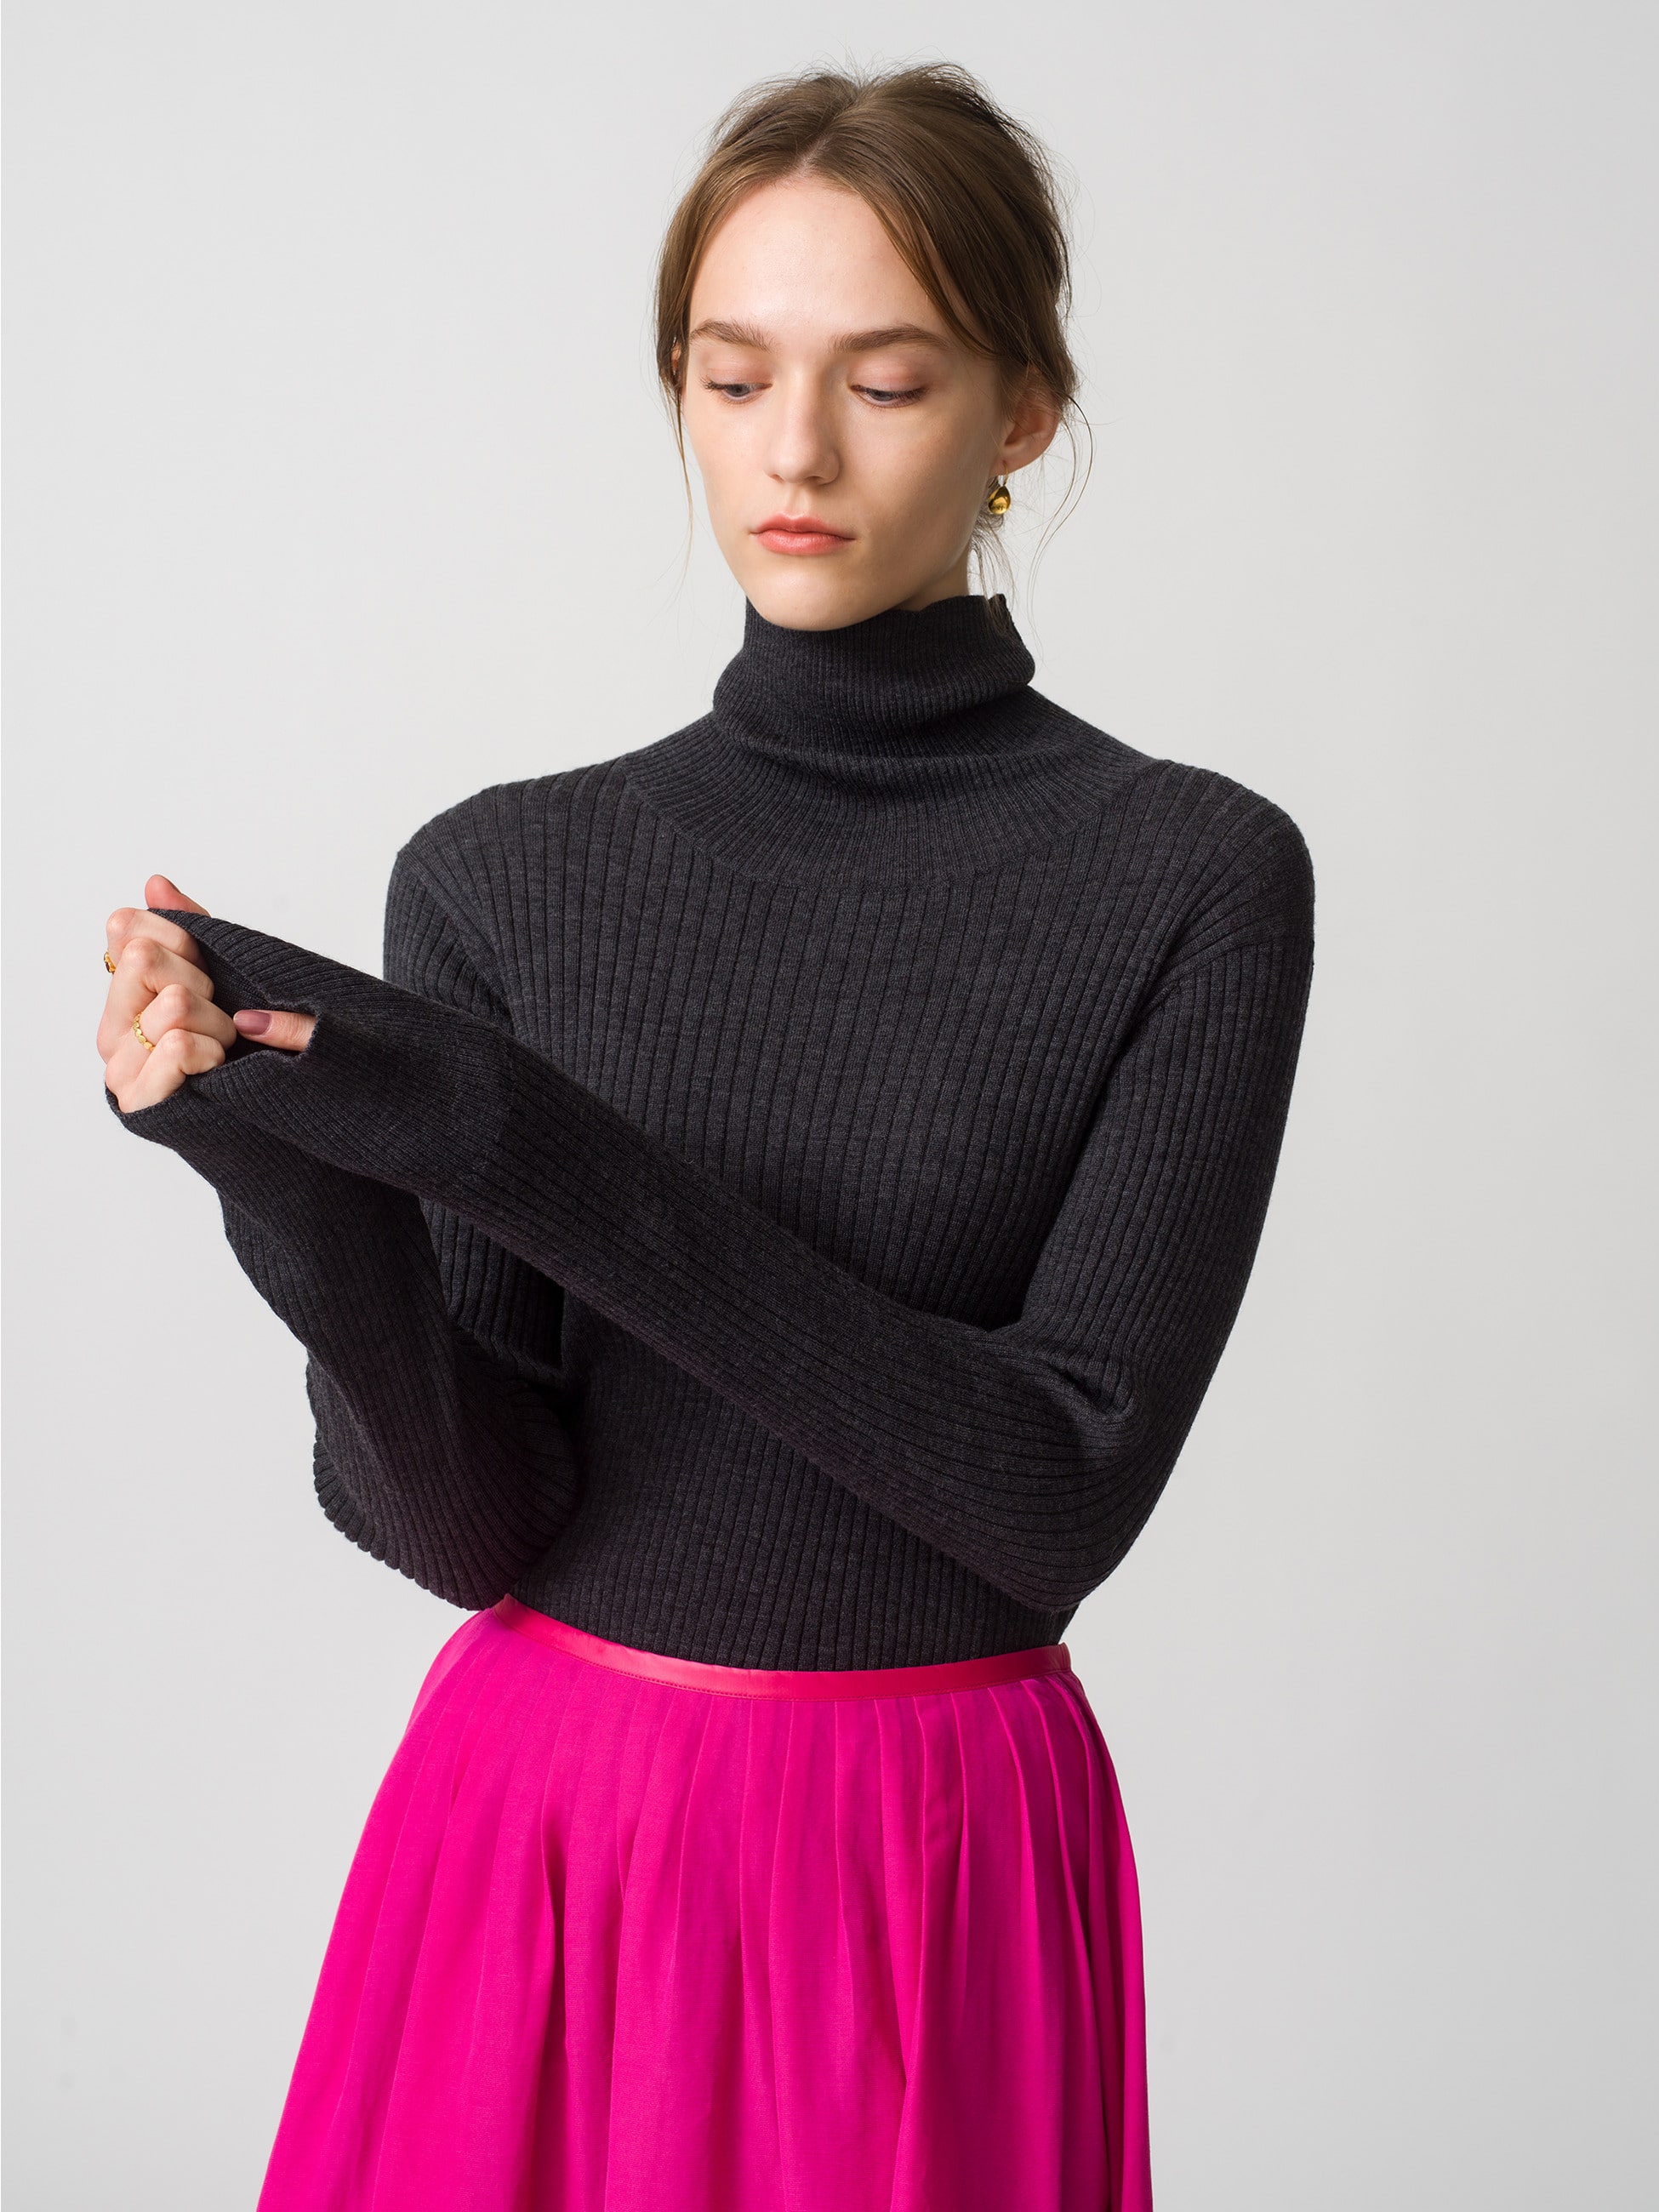 Clear Wool High Gauge Turtle Neck Knit Top